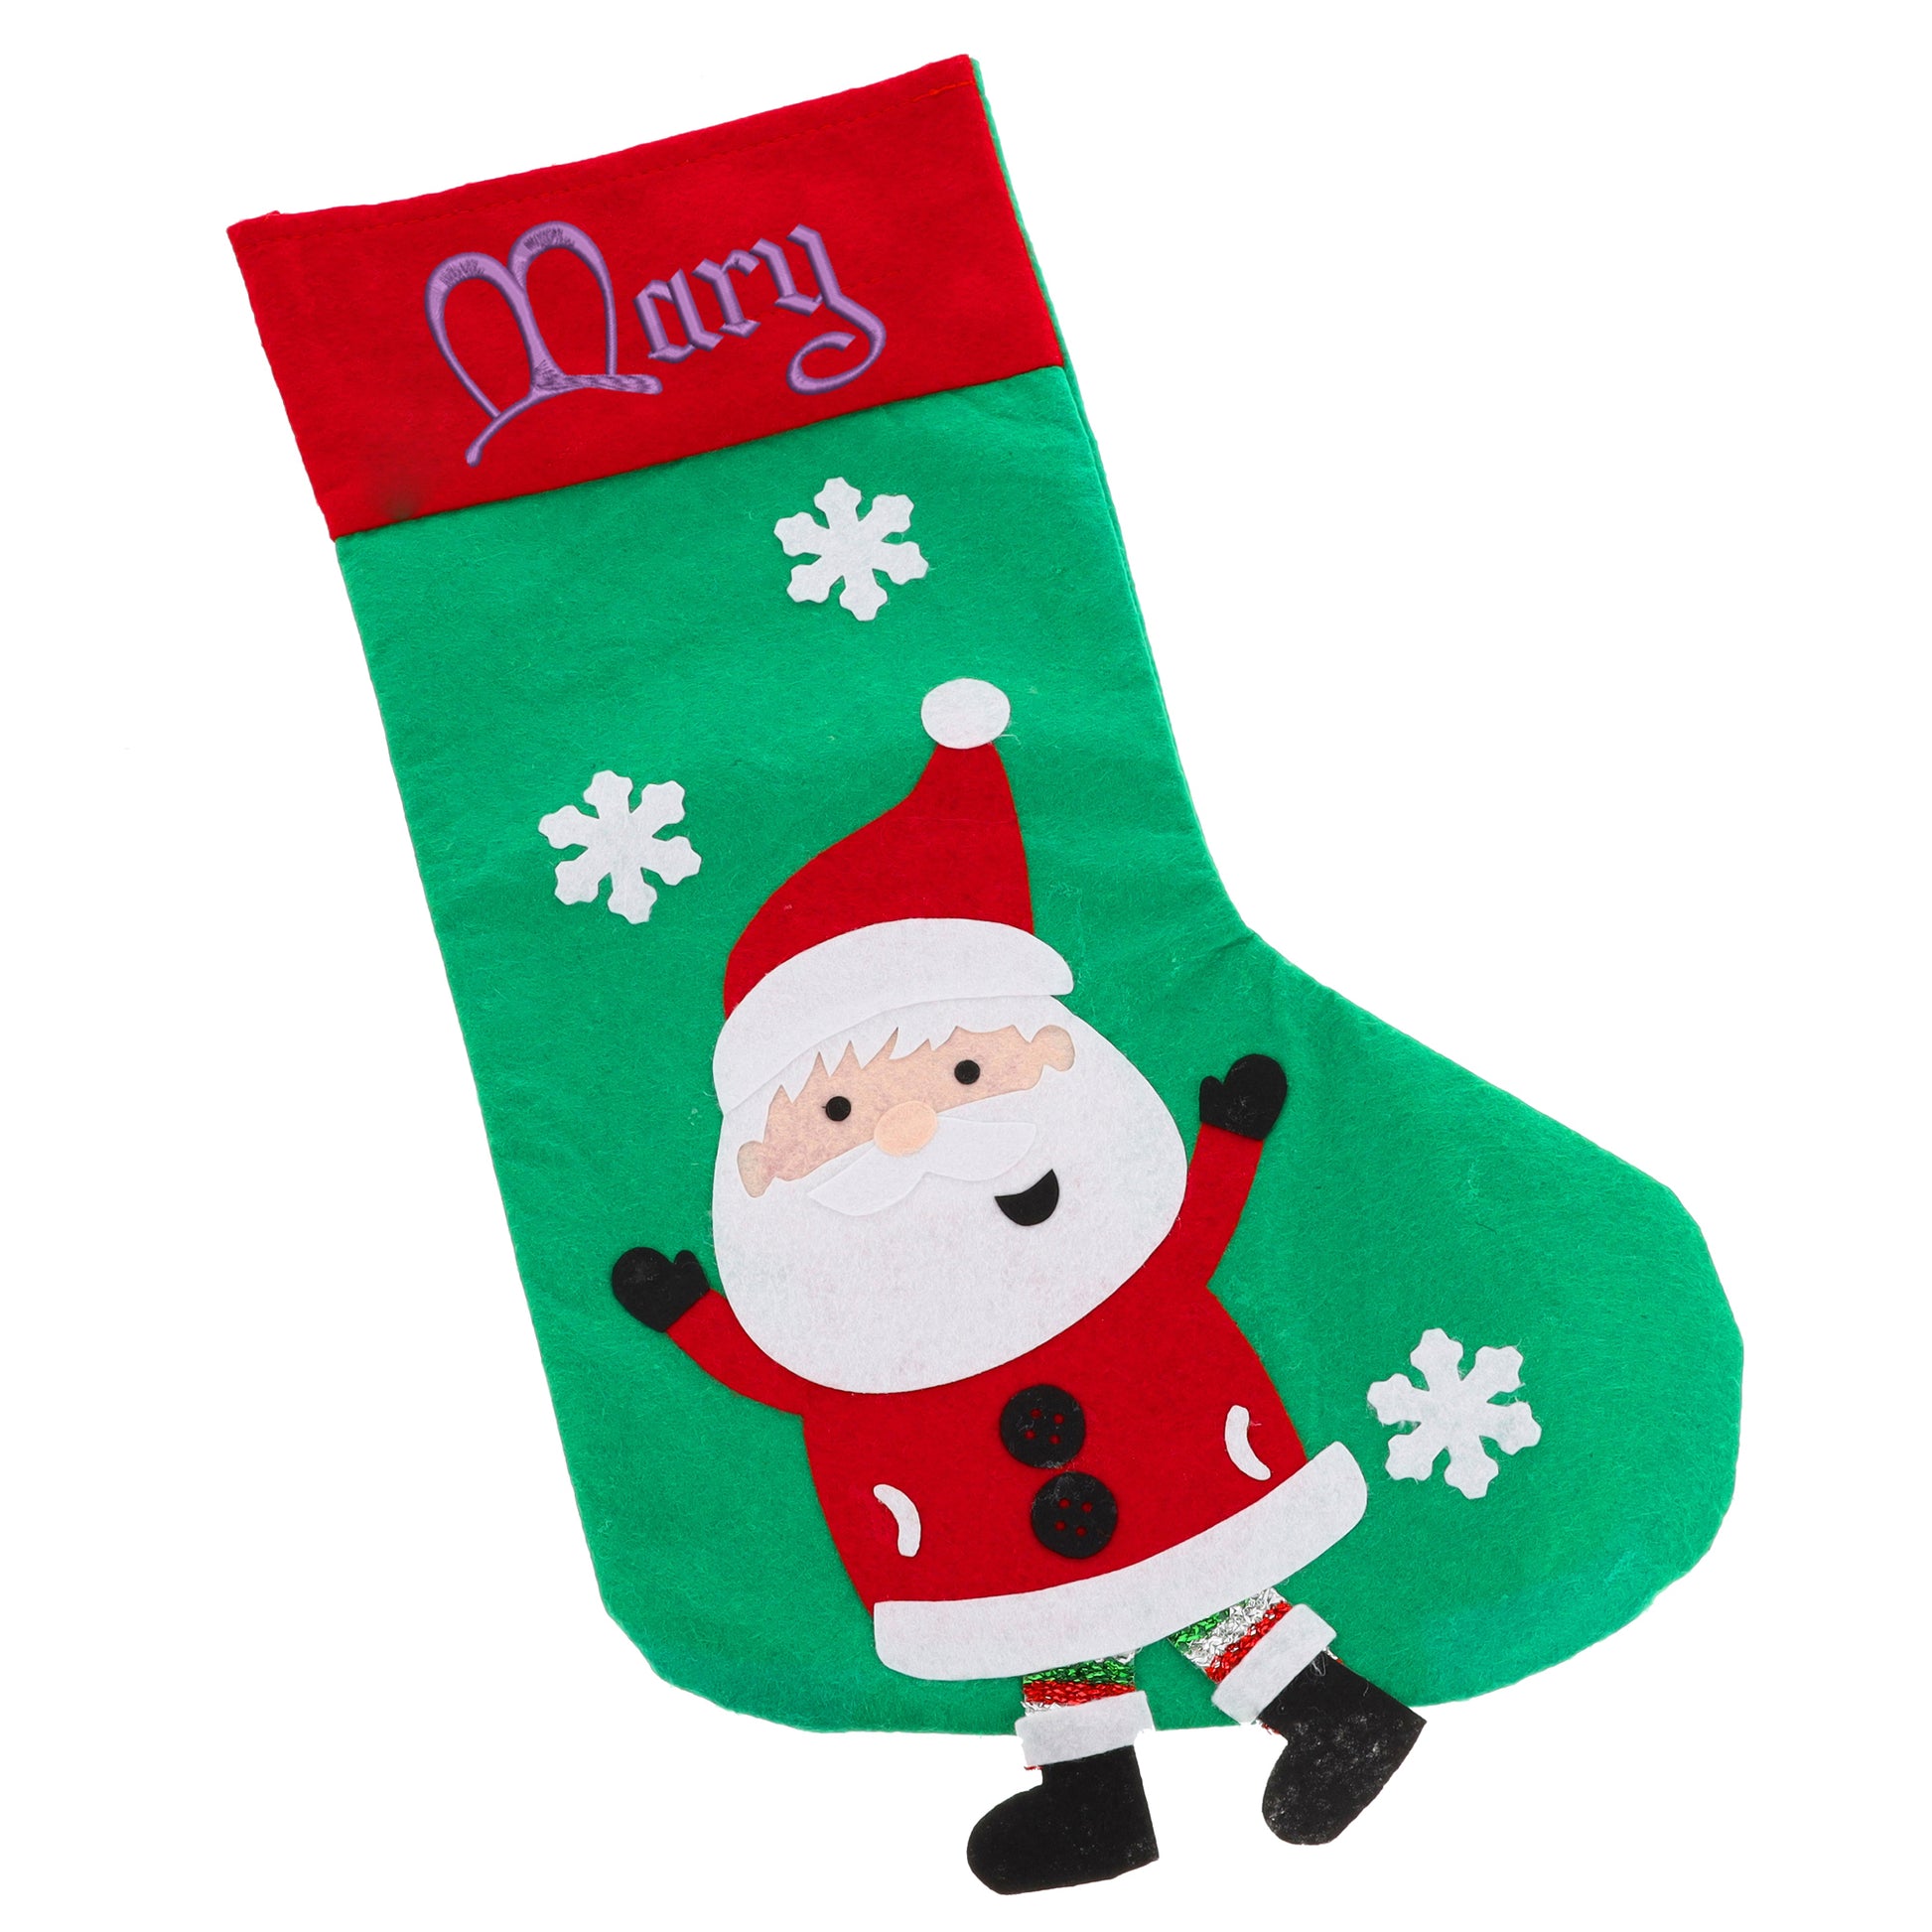 Personalised Embroidered Santa Christmas Stocking and Present Sack Set  - Always Looking Good -   